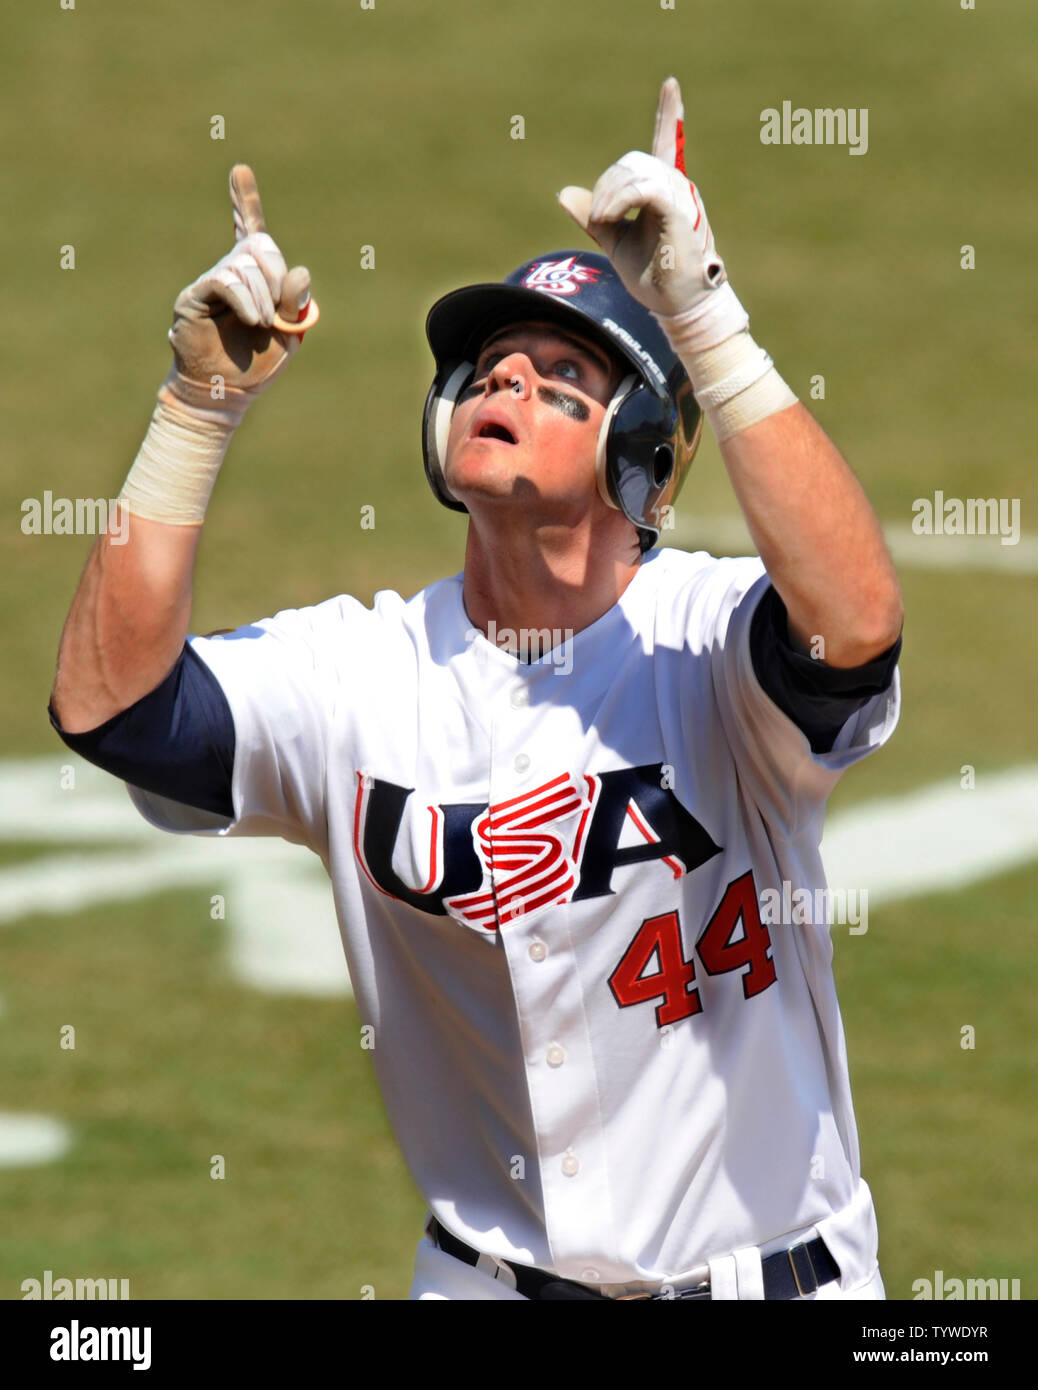 Usa S Matt Laporta Points To The Sky After Hitting A Homerun Against Japan To Even The Score At 1 1 In 2nd Inning Action At Wukesong Baseball Field August 23 08 At The